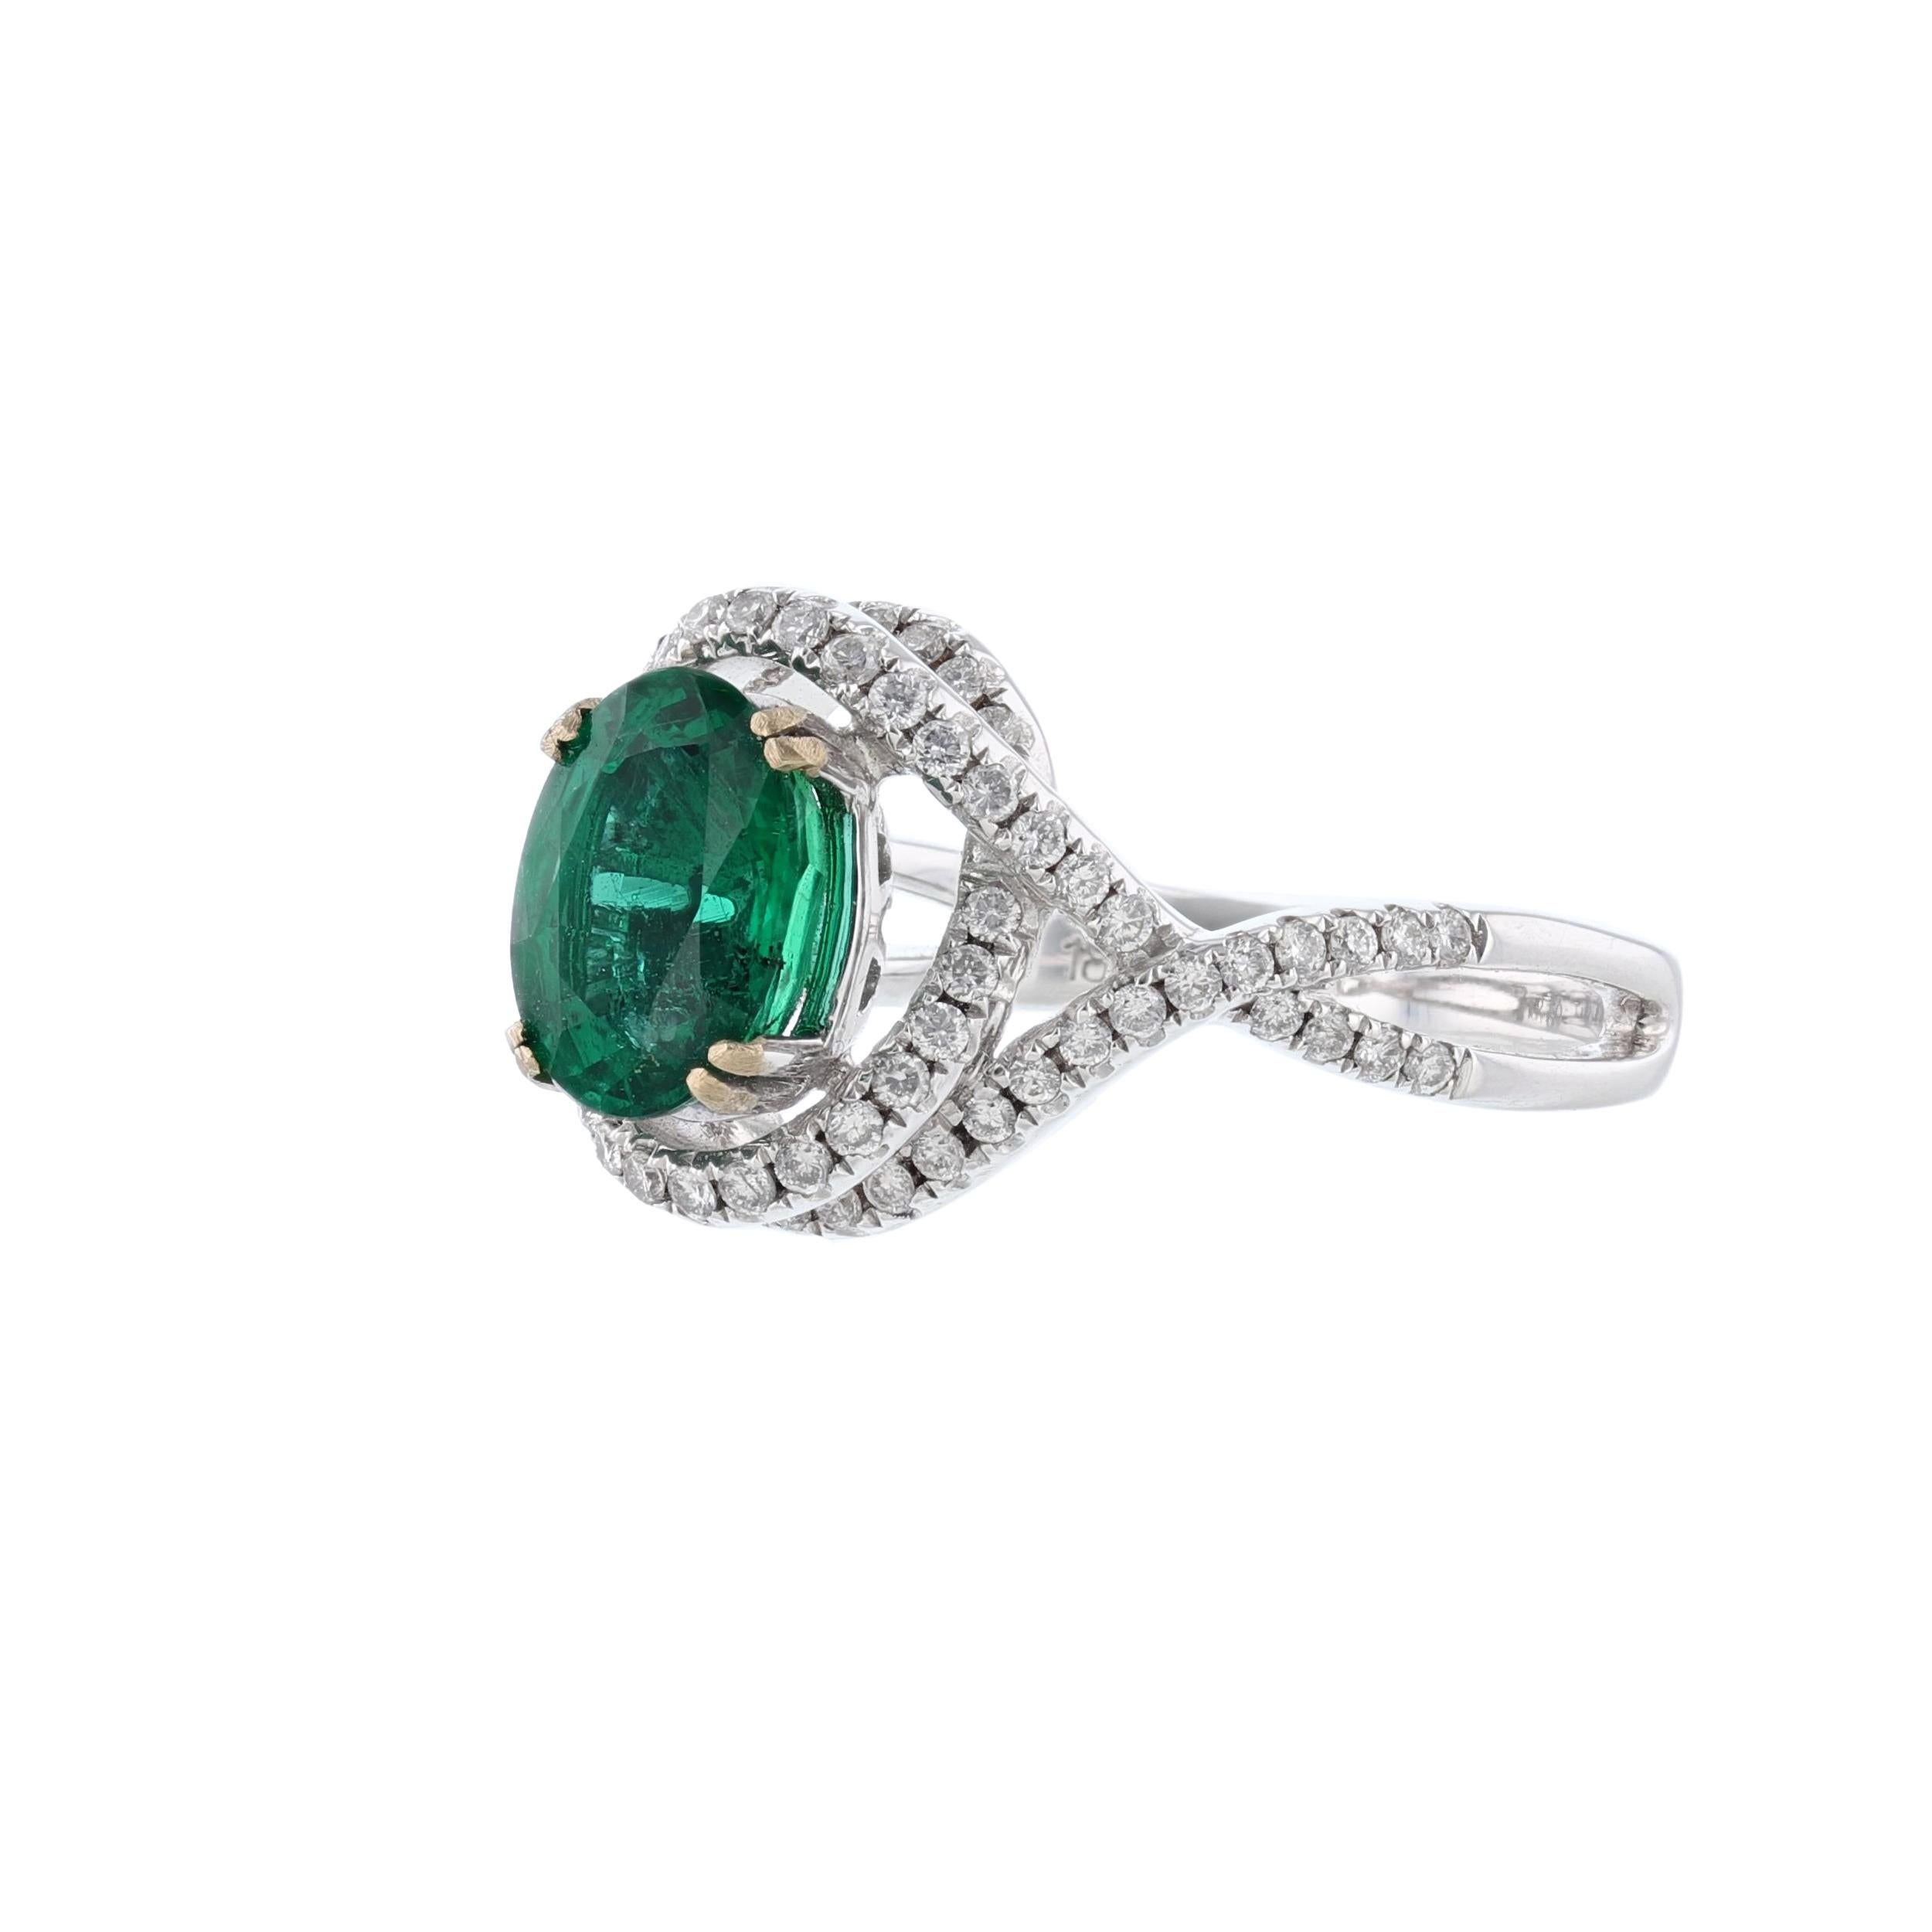 This ring is made in 14K white gold and features 1 oval cut natural beryl emerald weighing 1.70 carat. With color fancy grade (Green).  GIA Certified number 212528106. Along with 74 round cut diamonds weighing 0.40 carats. With a color grade (H) and